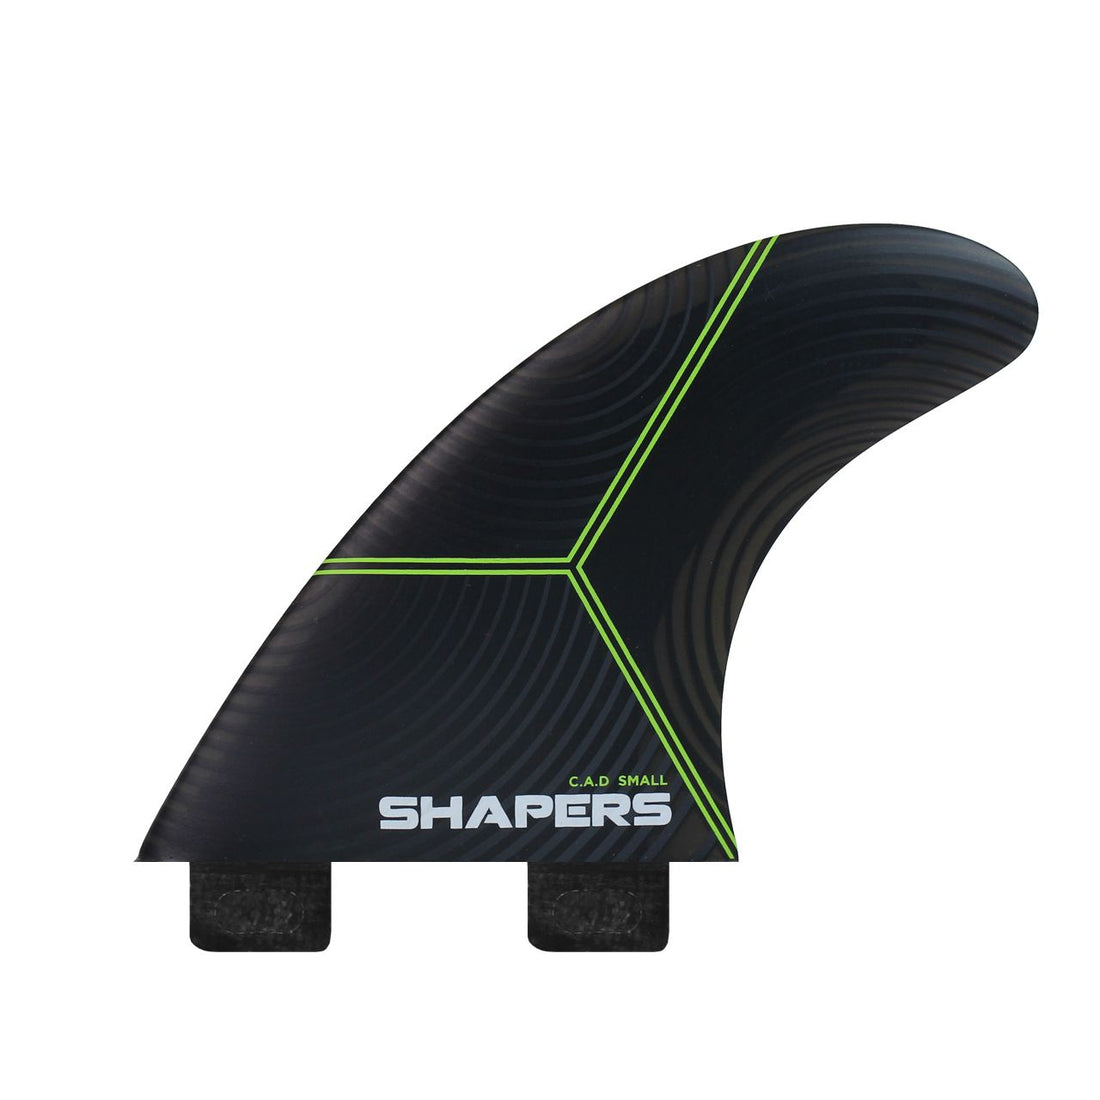 SHAPERS C.A.D SMALL 3-FIN DUAL TAB BASE